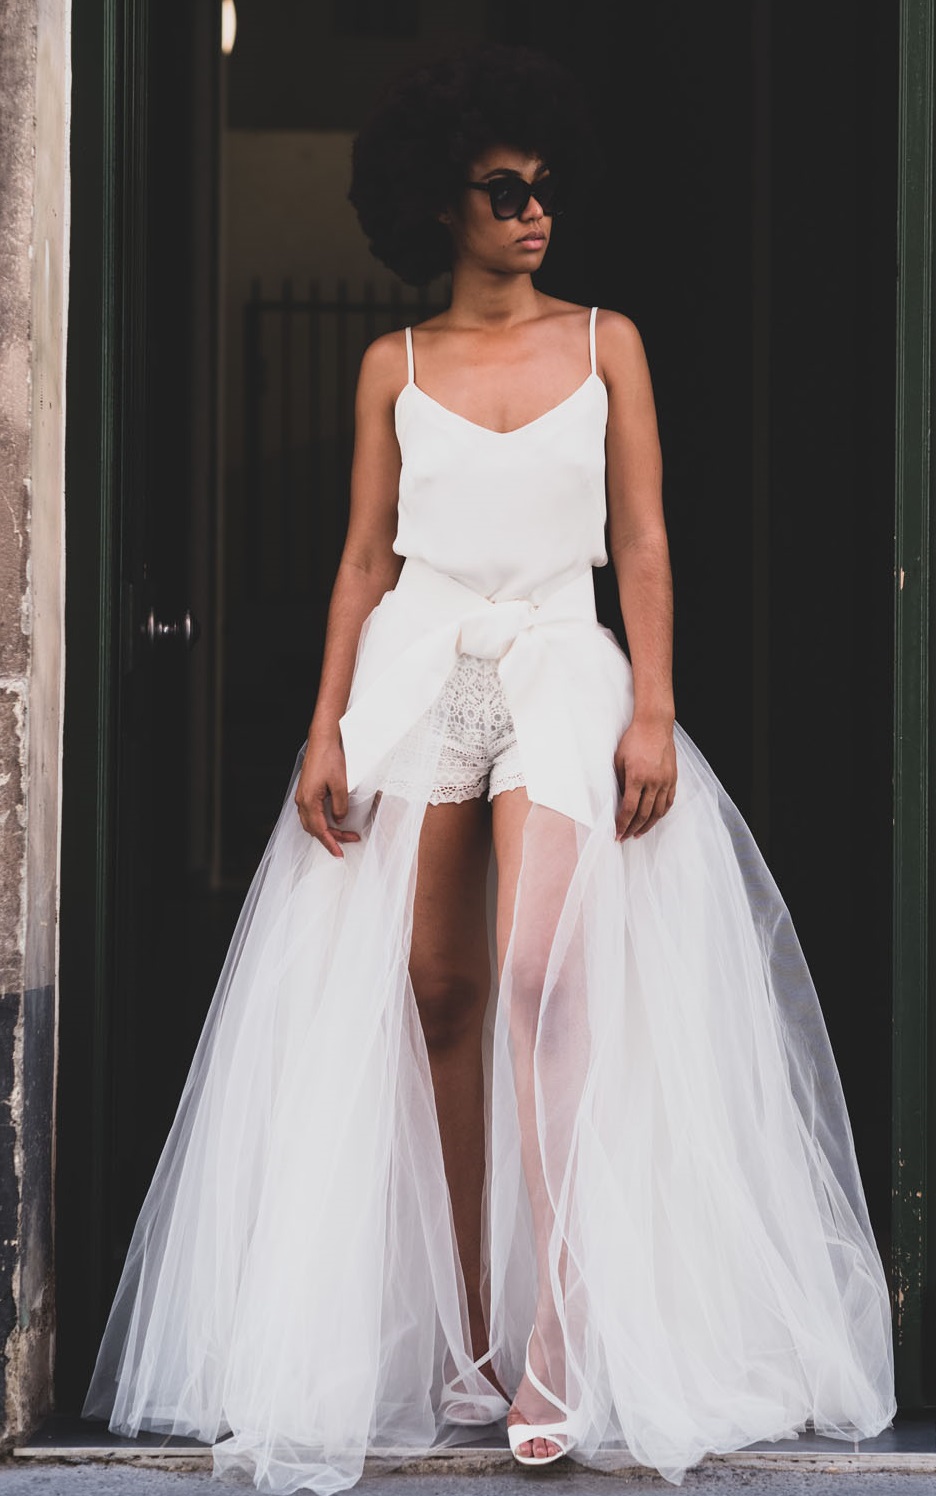 Le Wedding Magazine - Blog Mariage - ©Max Chaoul